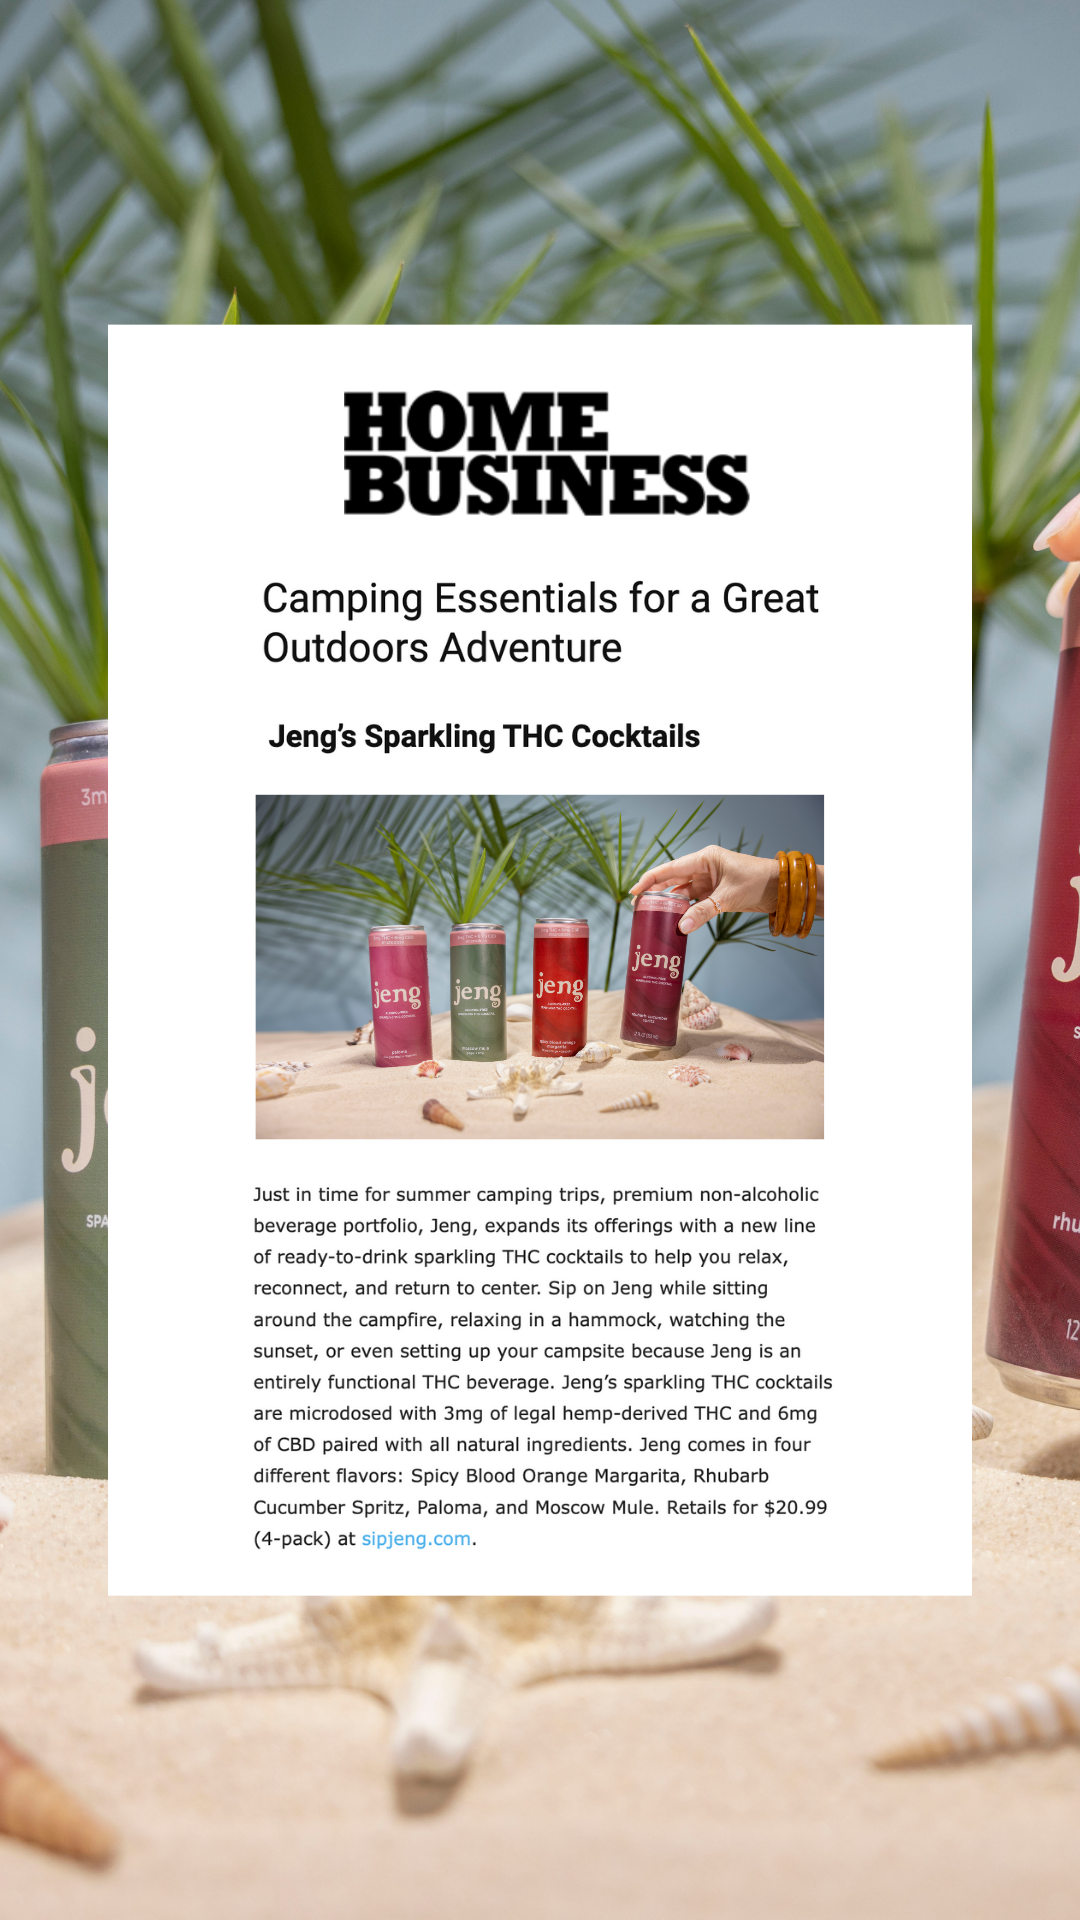 Jeng Featured in Home Business Magazine